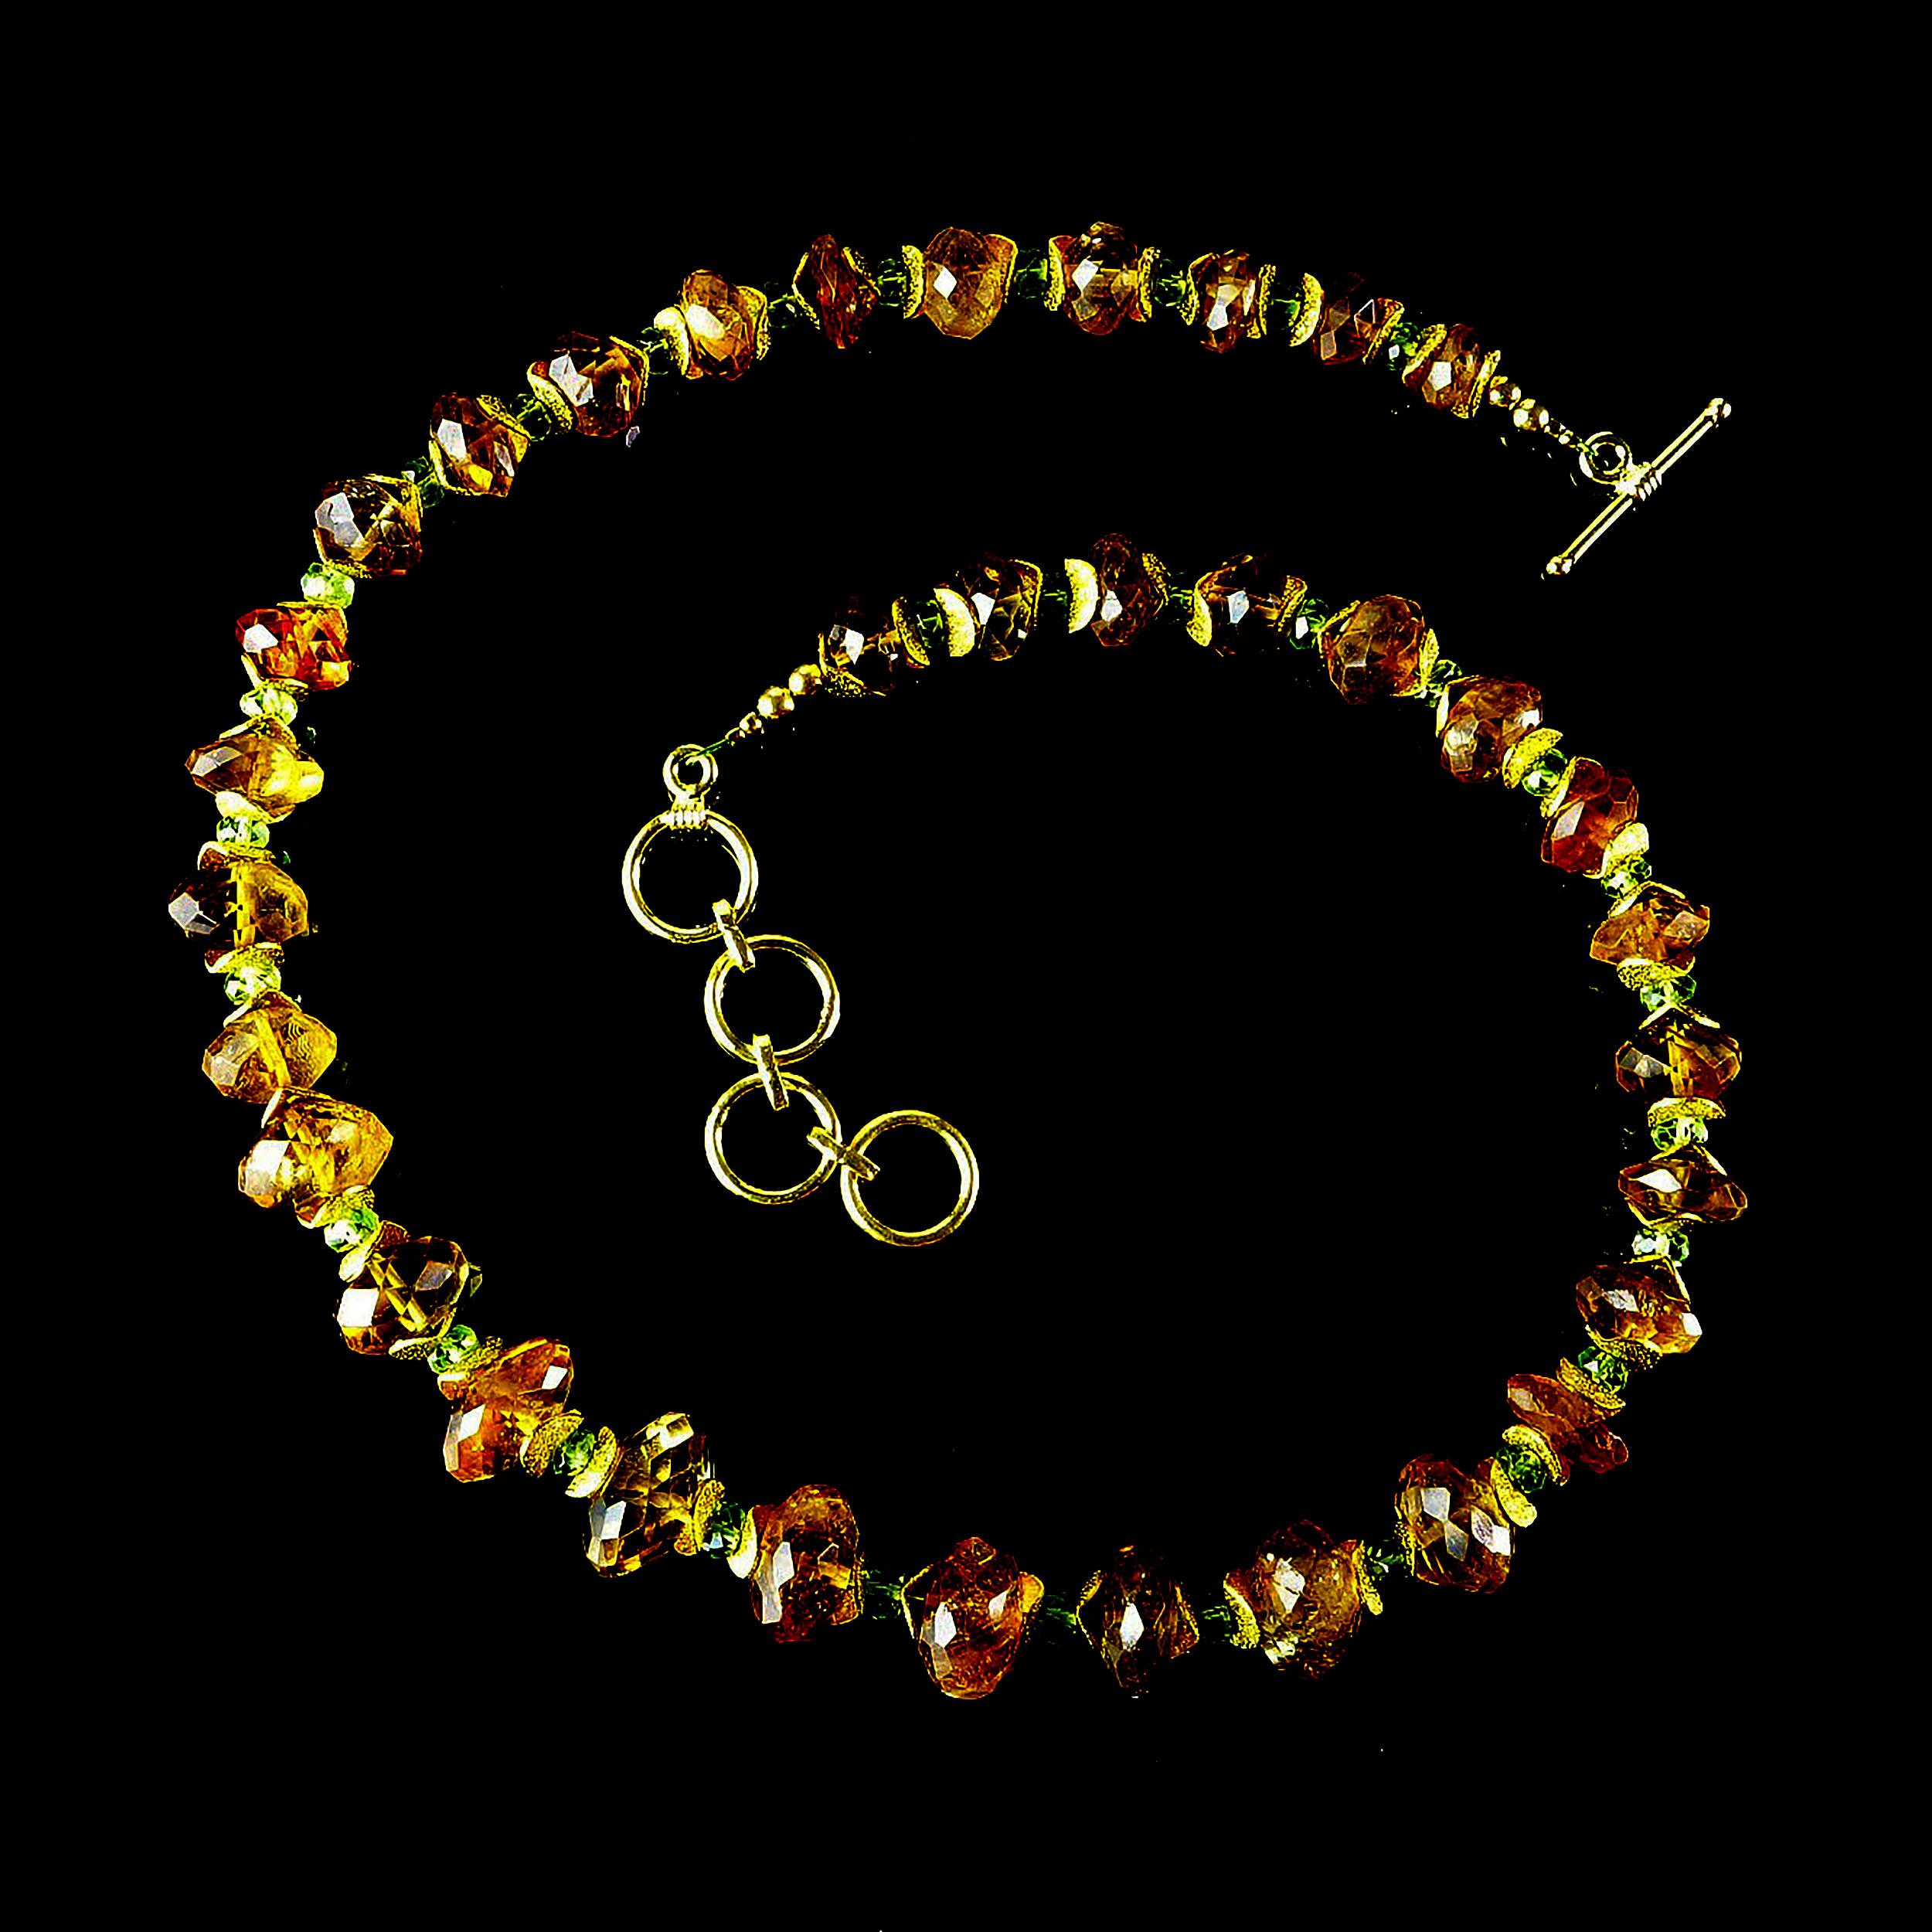 Artisan AJD Faceted Citrine Rondelles with Peridot and Gold Necklace